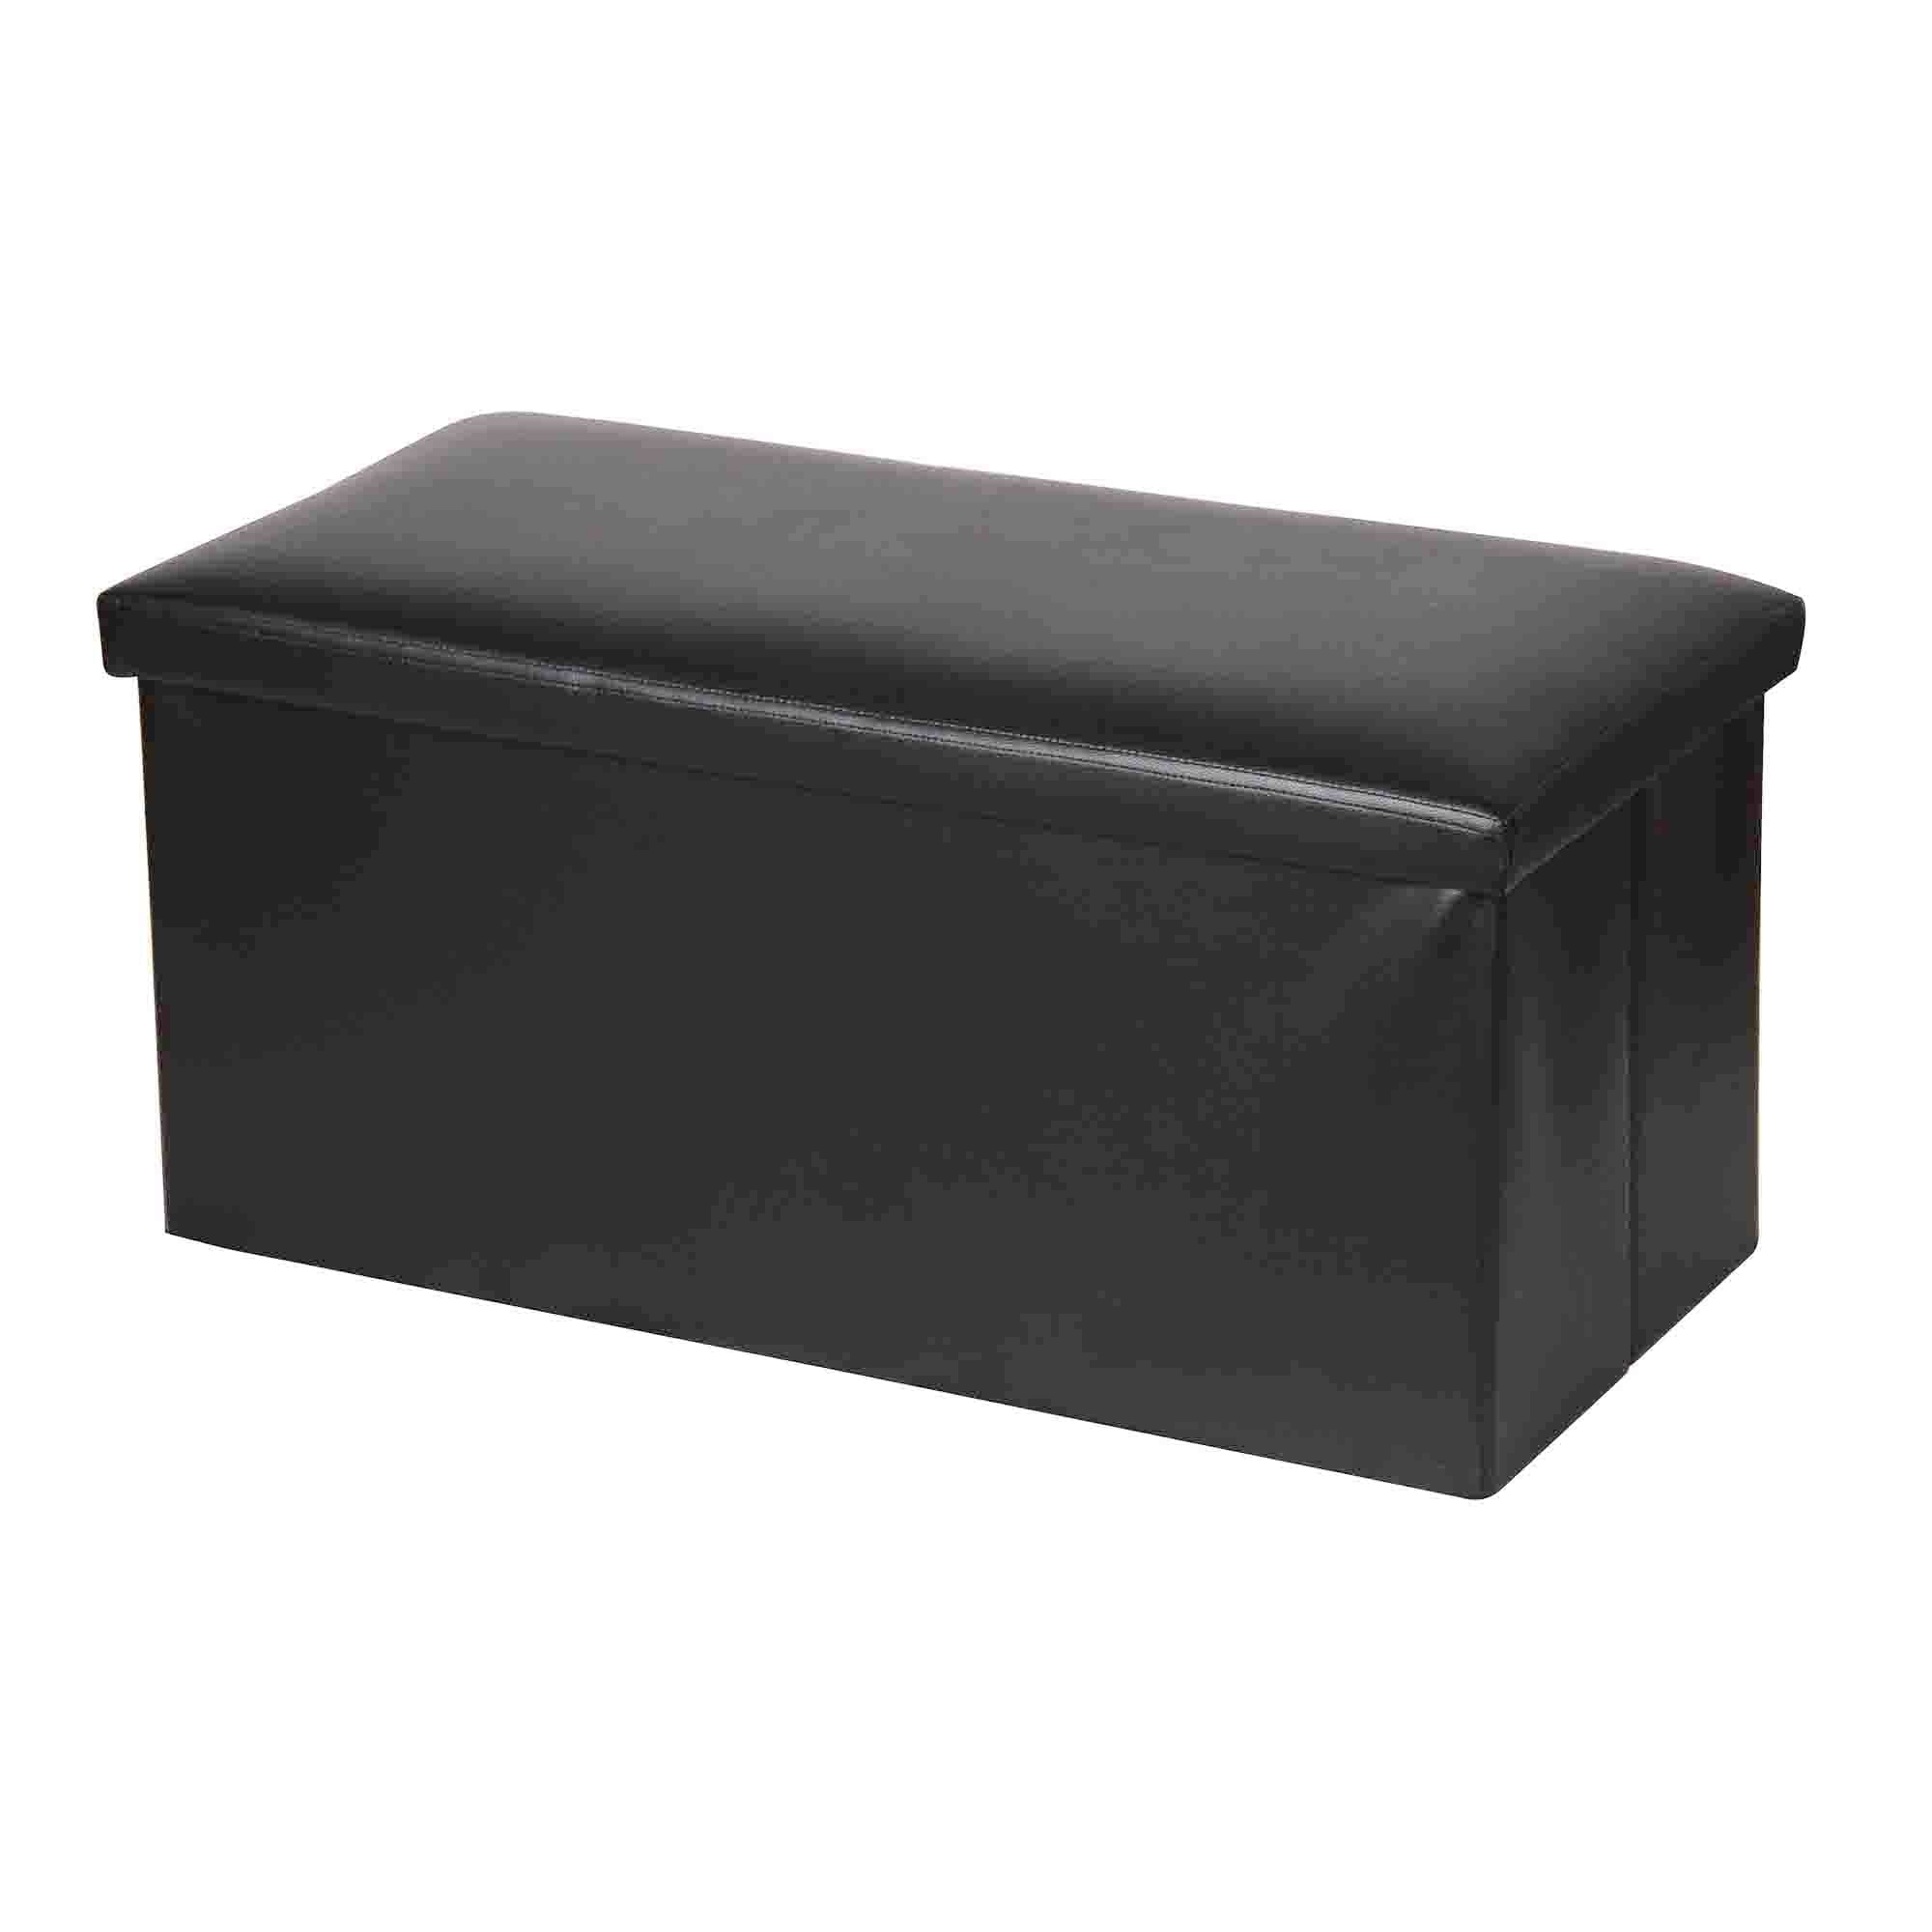 Home Basics Faux Leather Rectangular Storage Ottoman, Black $25.00 EACH, CASE PACK OF 4